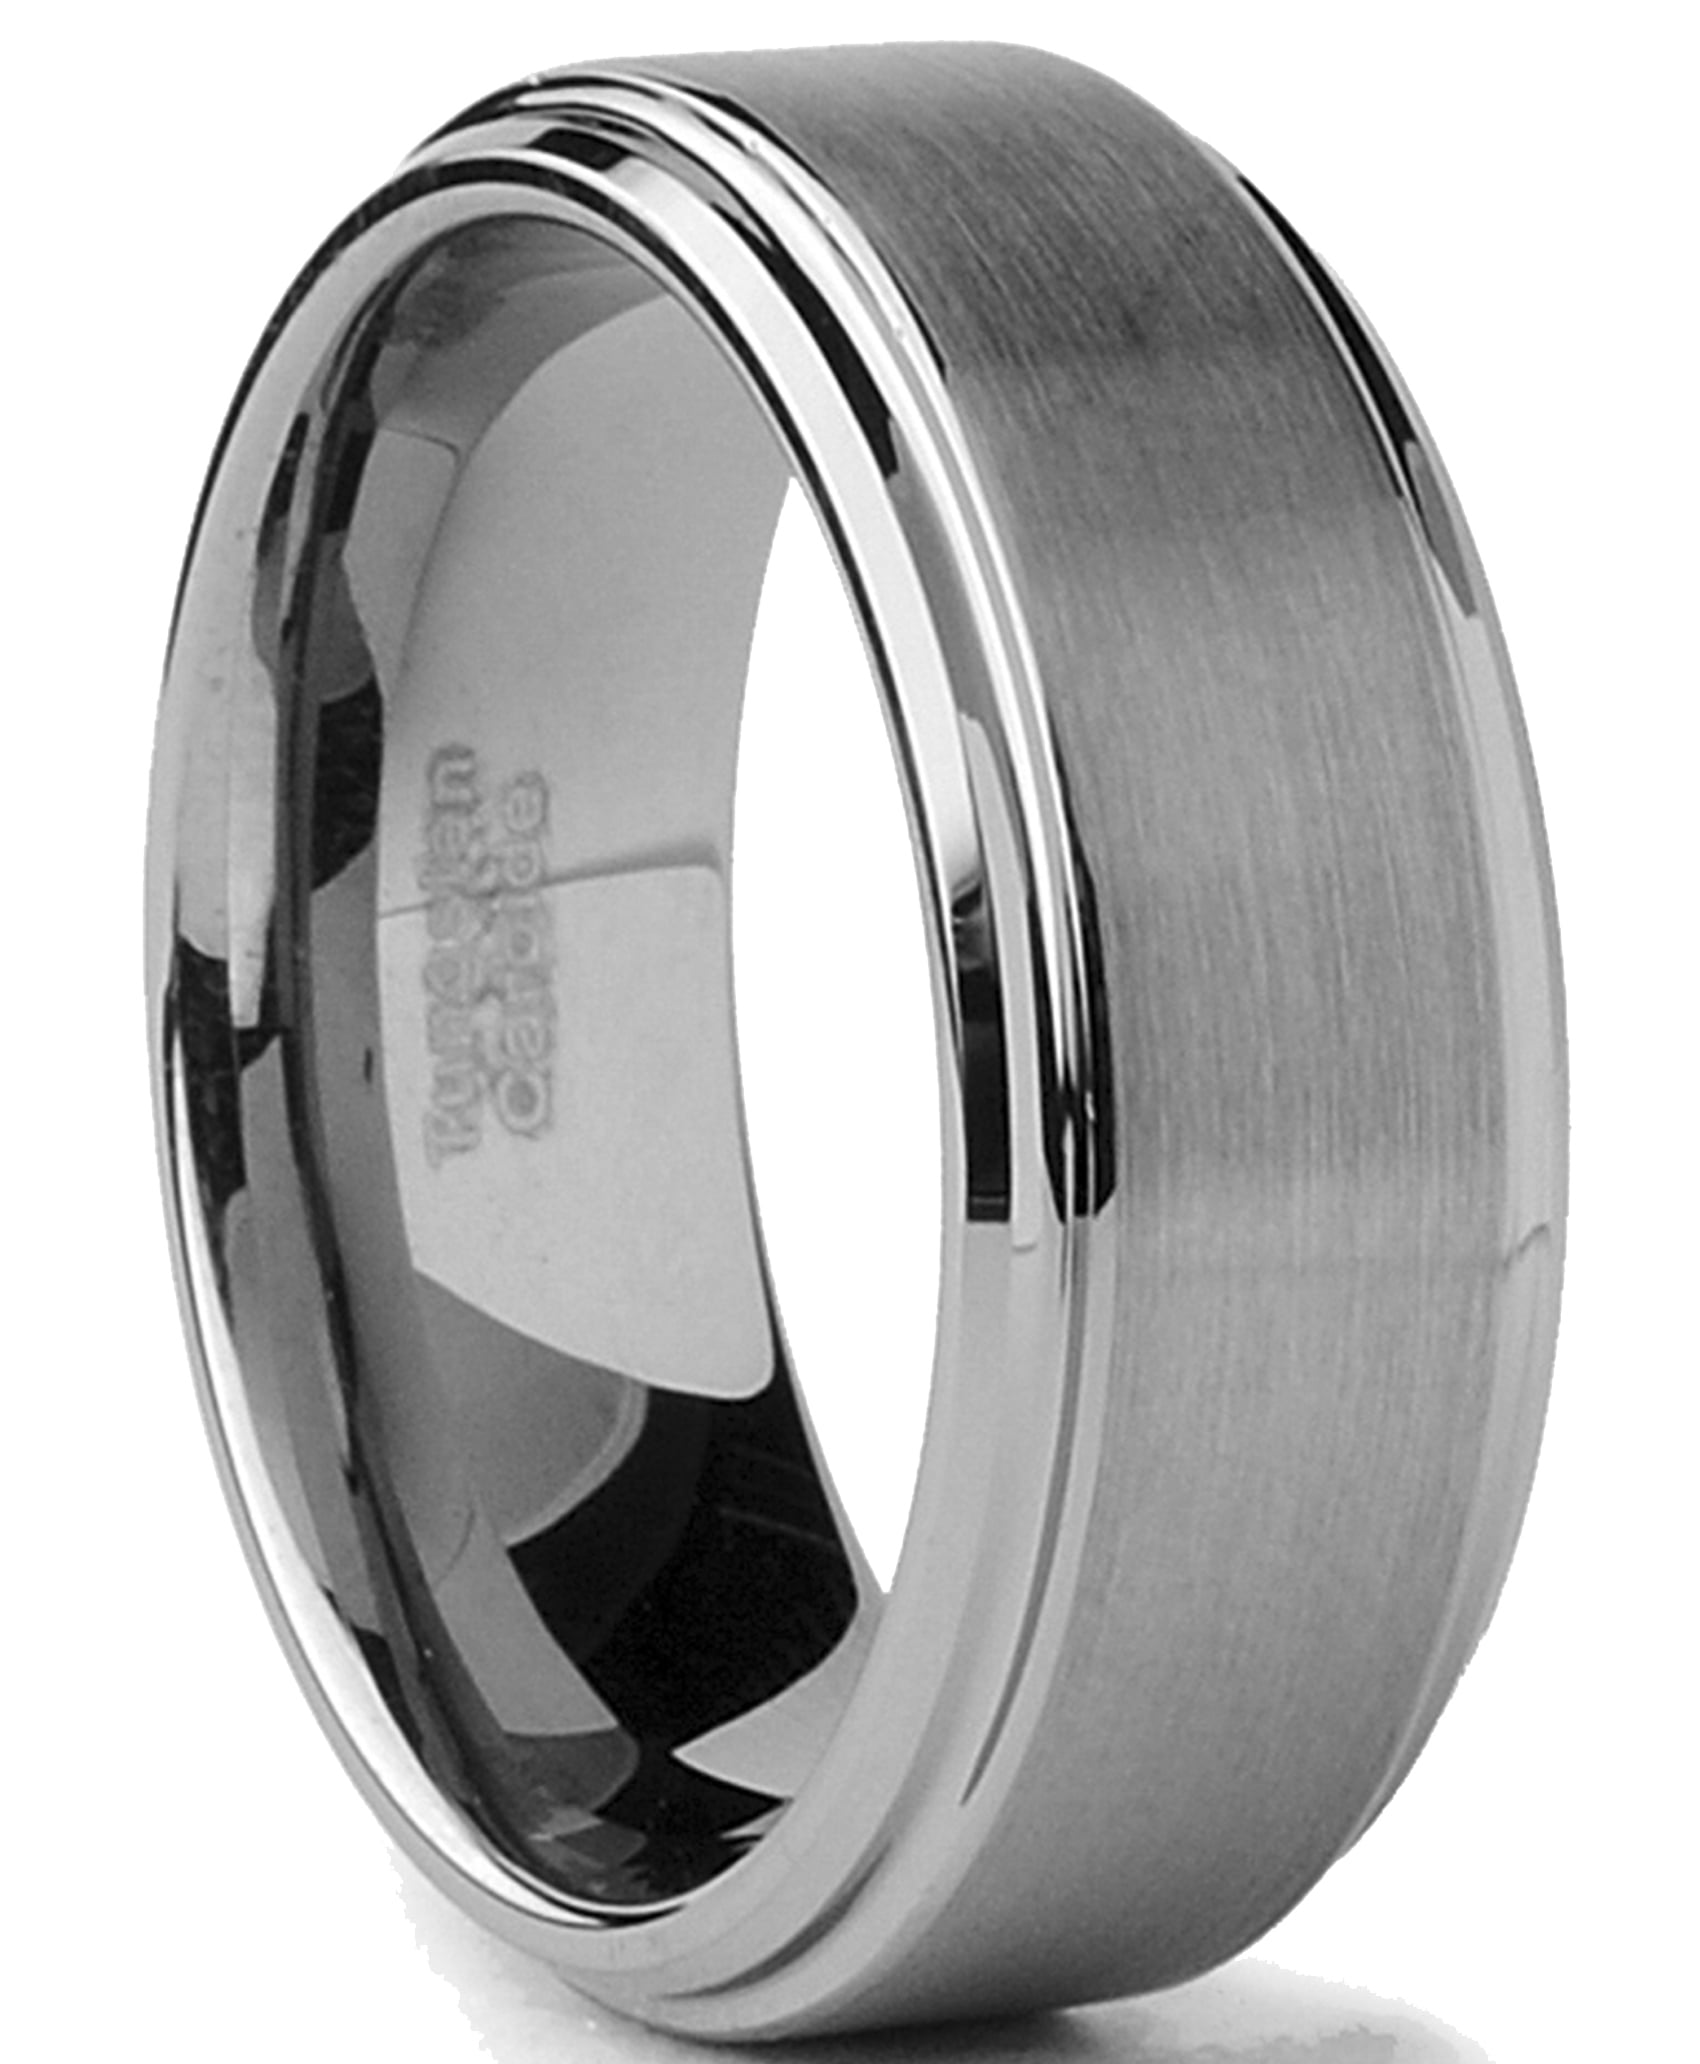 Bishilin Tungsten Beveled Polished Brushed Center Silver 6MM Ring Wedding Band for Mens Size 13